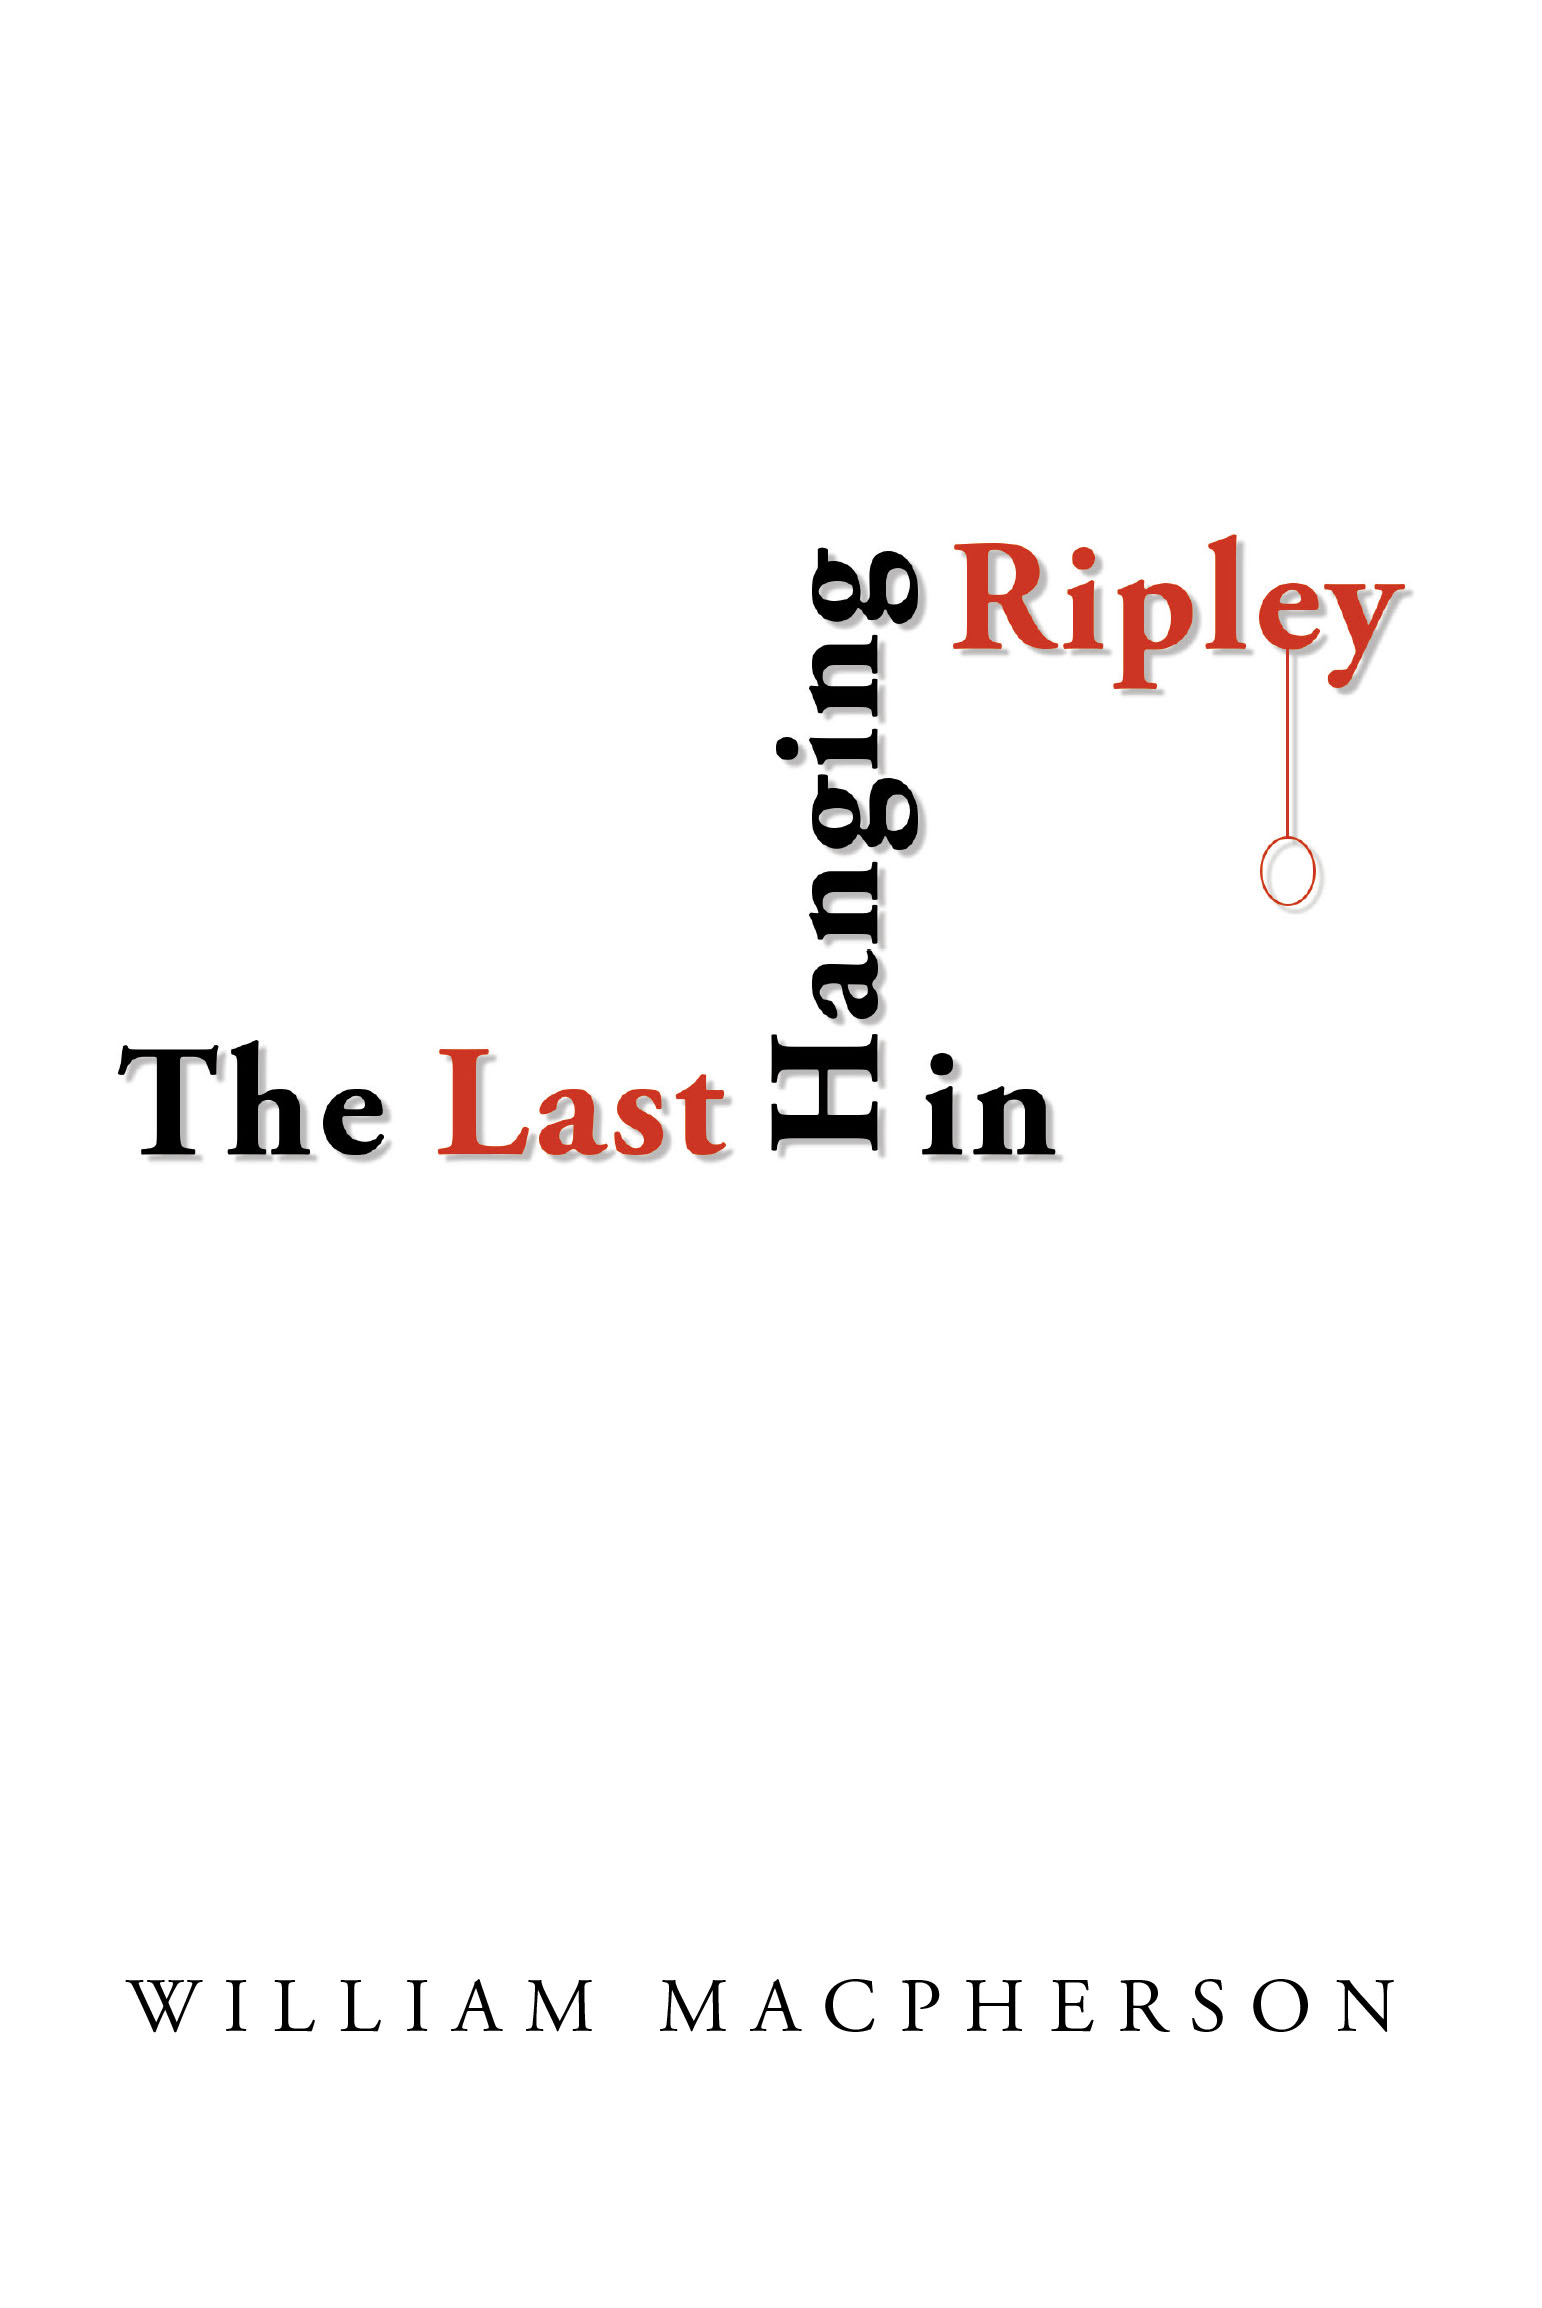 Author William Macpherson’s New Book, "The Last Hanging in Ripley," is a Historical Novel About the Troubled Life of Farmhand John F. Morgan and His Horrific Crimes